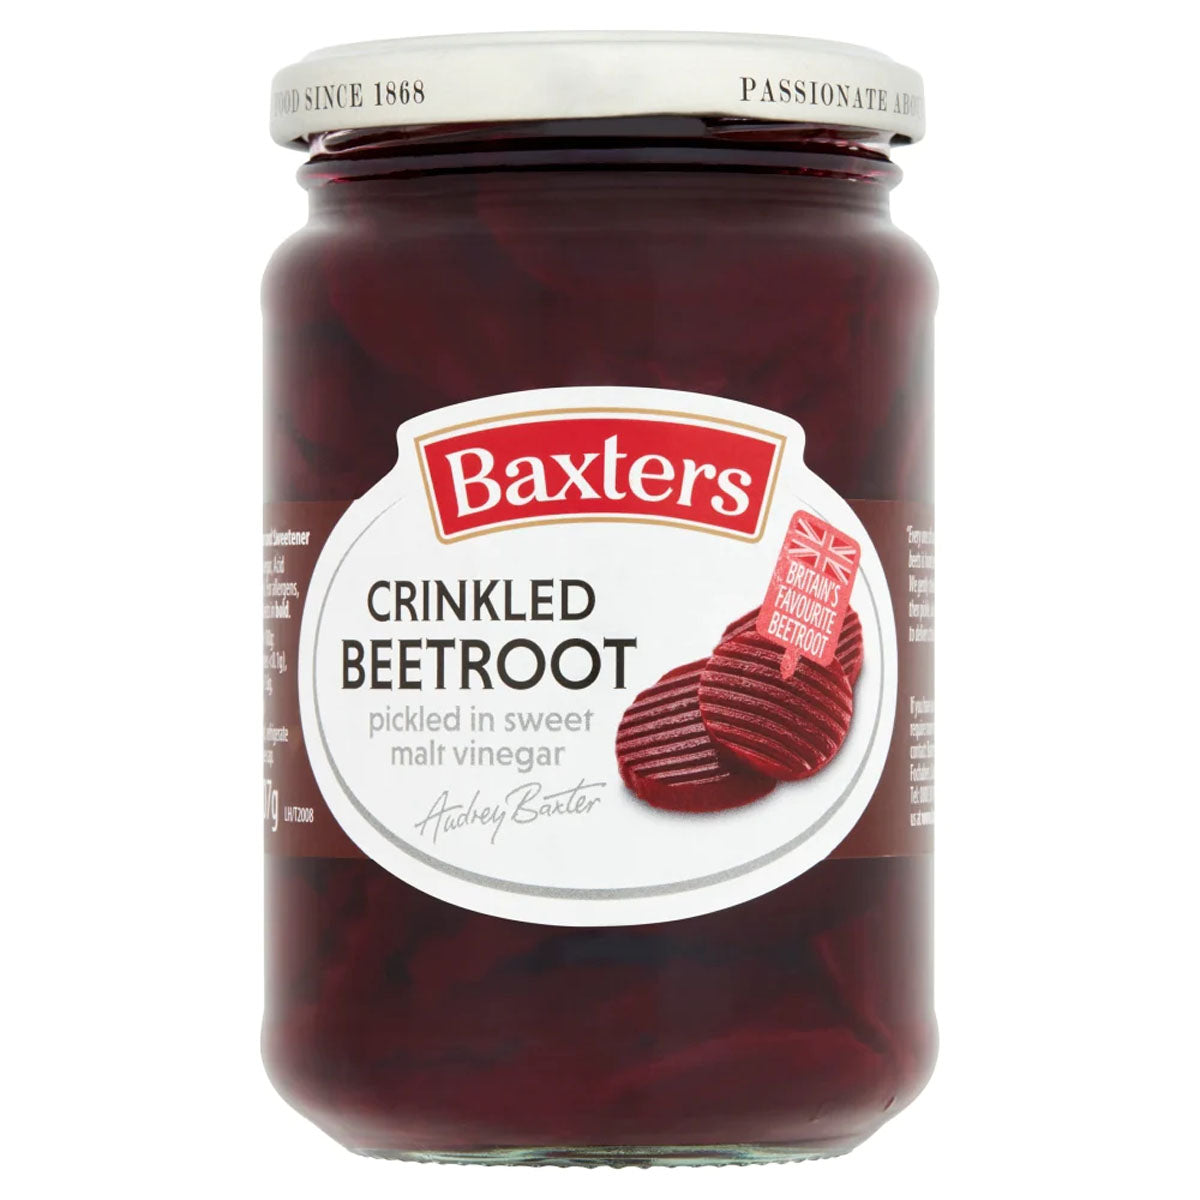 Baxters - Crinkled Beetroot - 340g - Continental Food Store